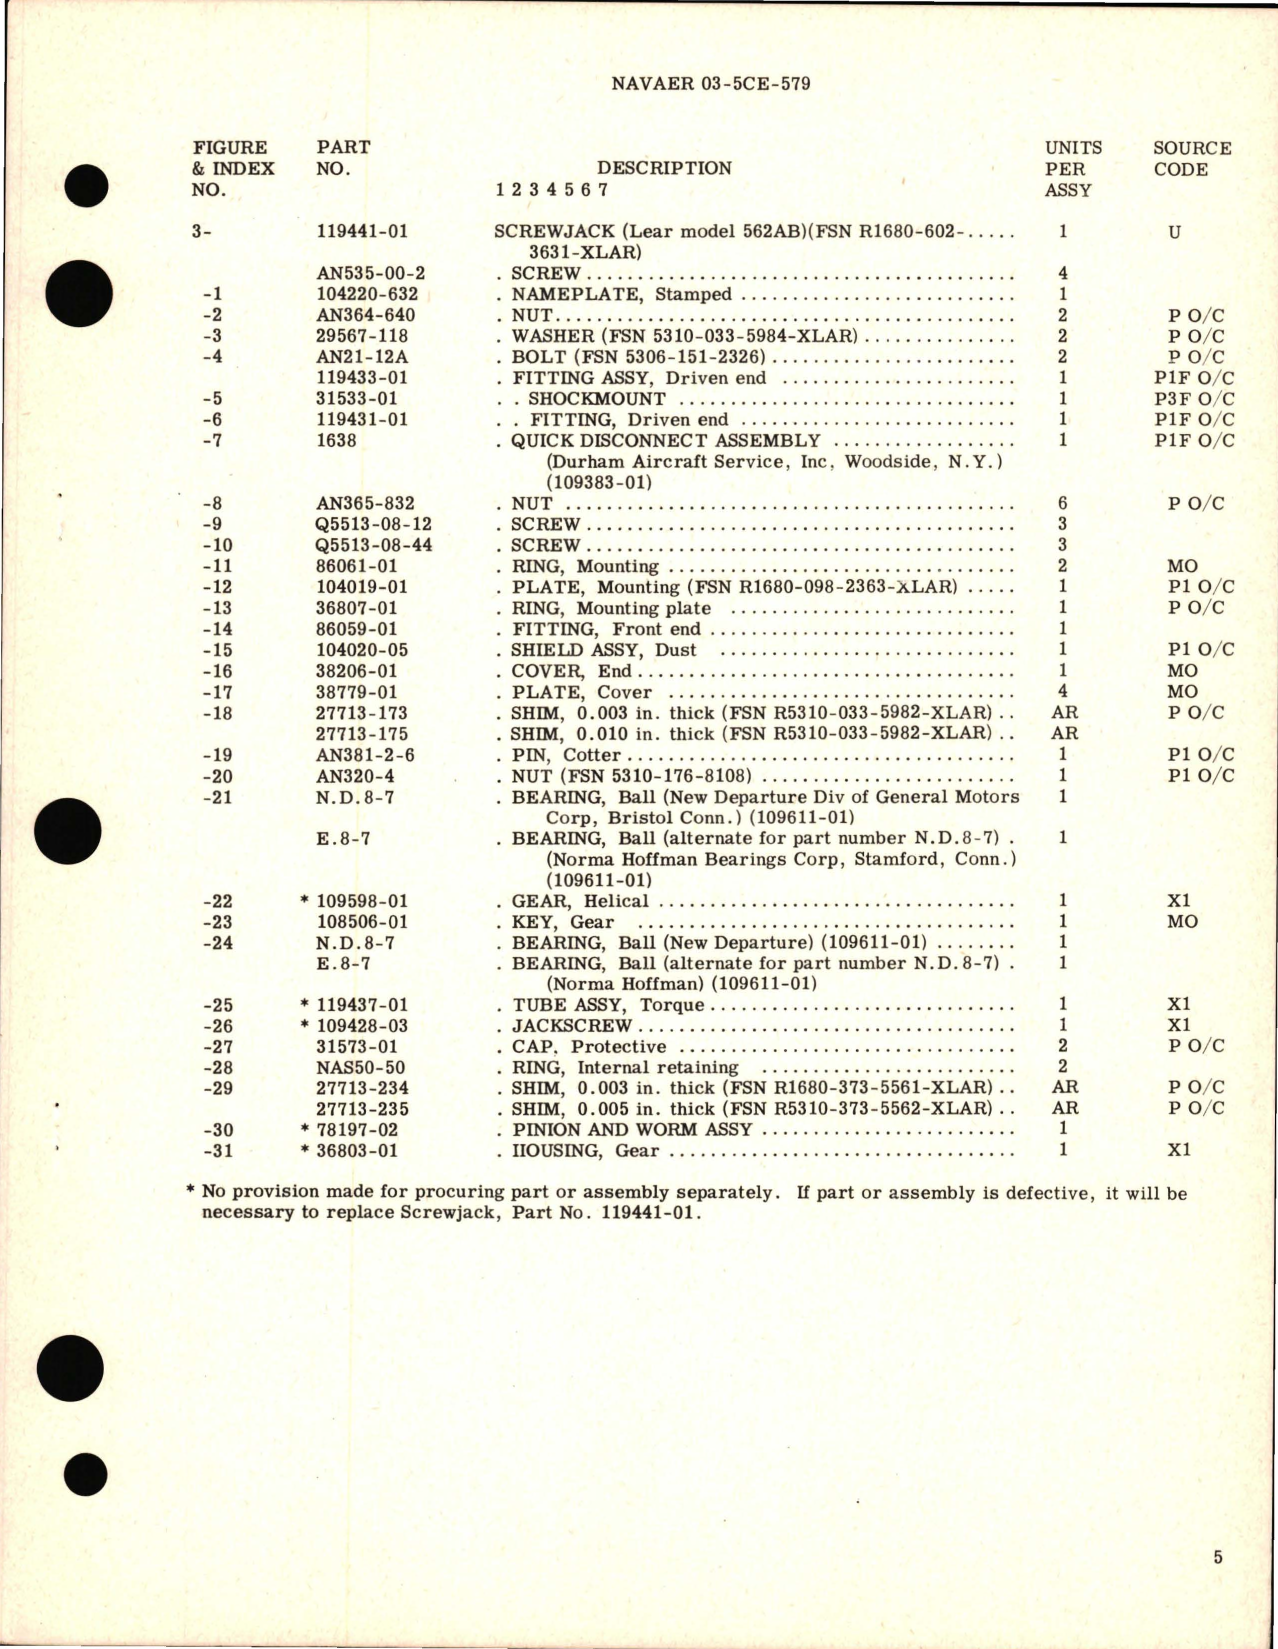 Sample page 5 from AirCorps Library document: Overhaul Instructions with Parts Breakdown for Screwjack - Part 119441-01 